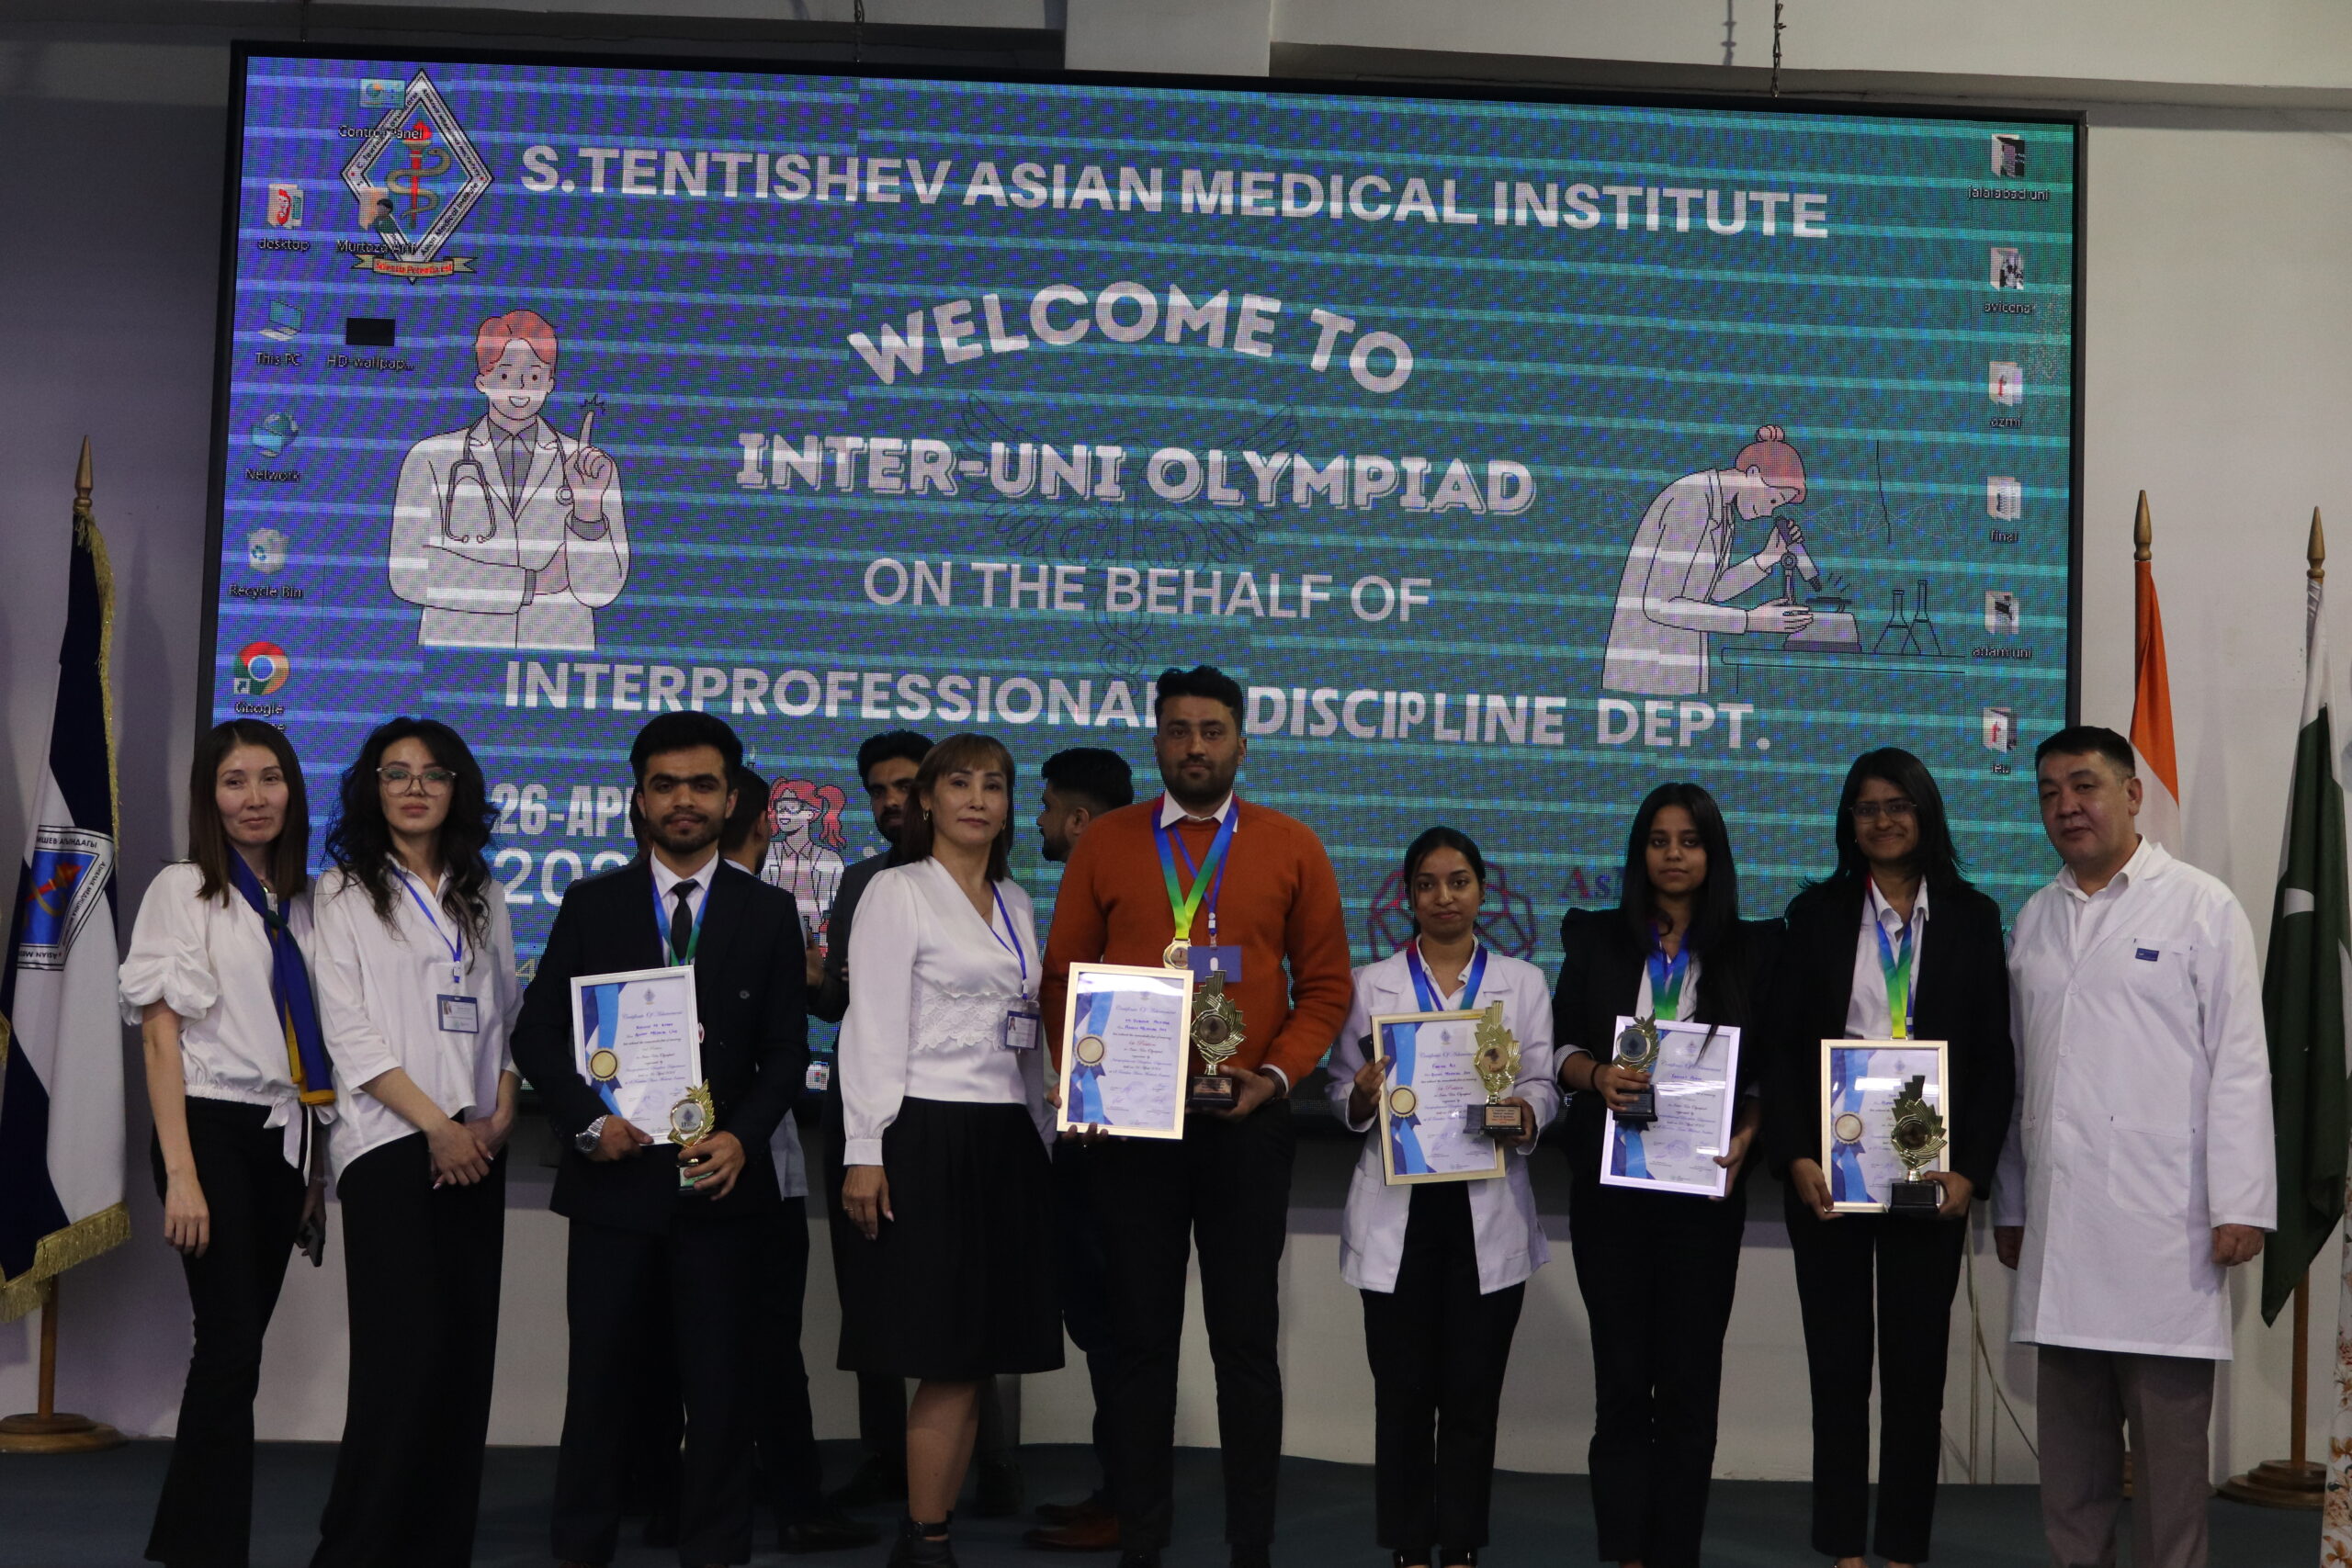 Demonstration of Academic Excellence: Review of the Interuniversity Olympiad on Interprofessional Disciplines organized by the Department of Interprofessional Disciplines, S. Tentishev Asian Medical Institute, dedicated to the birthday of the founder Erkin Satkynbaevich.